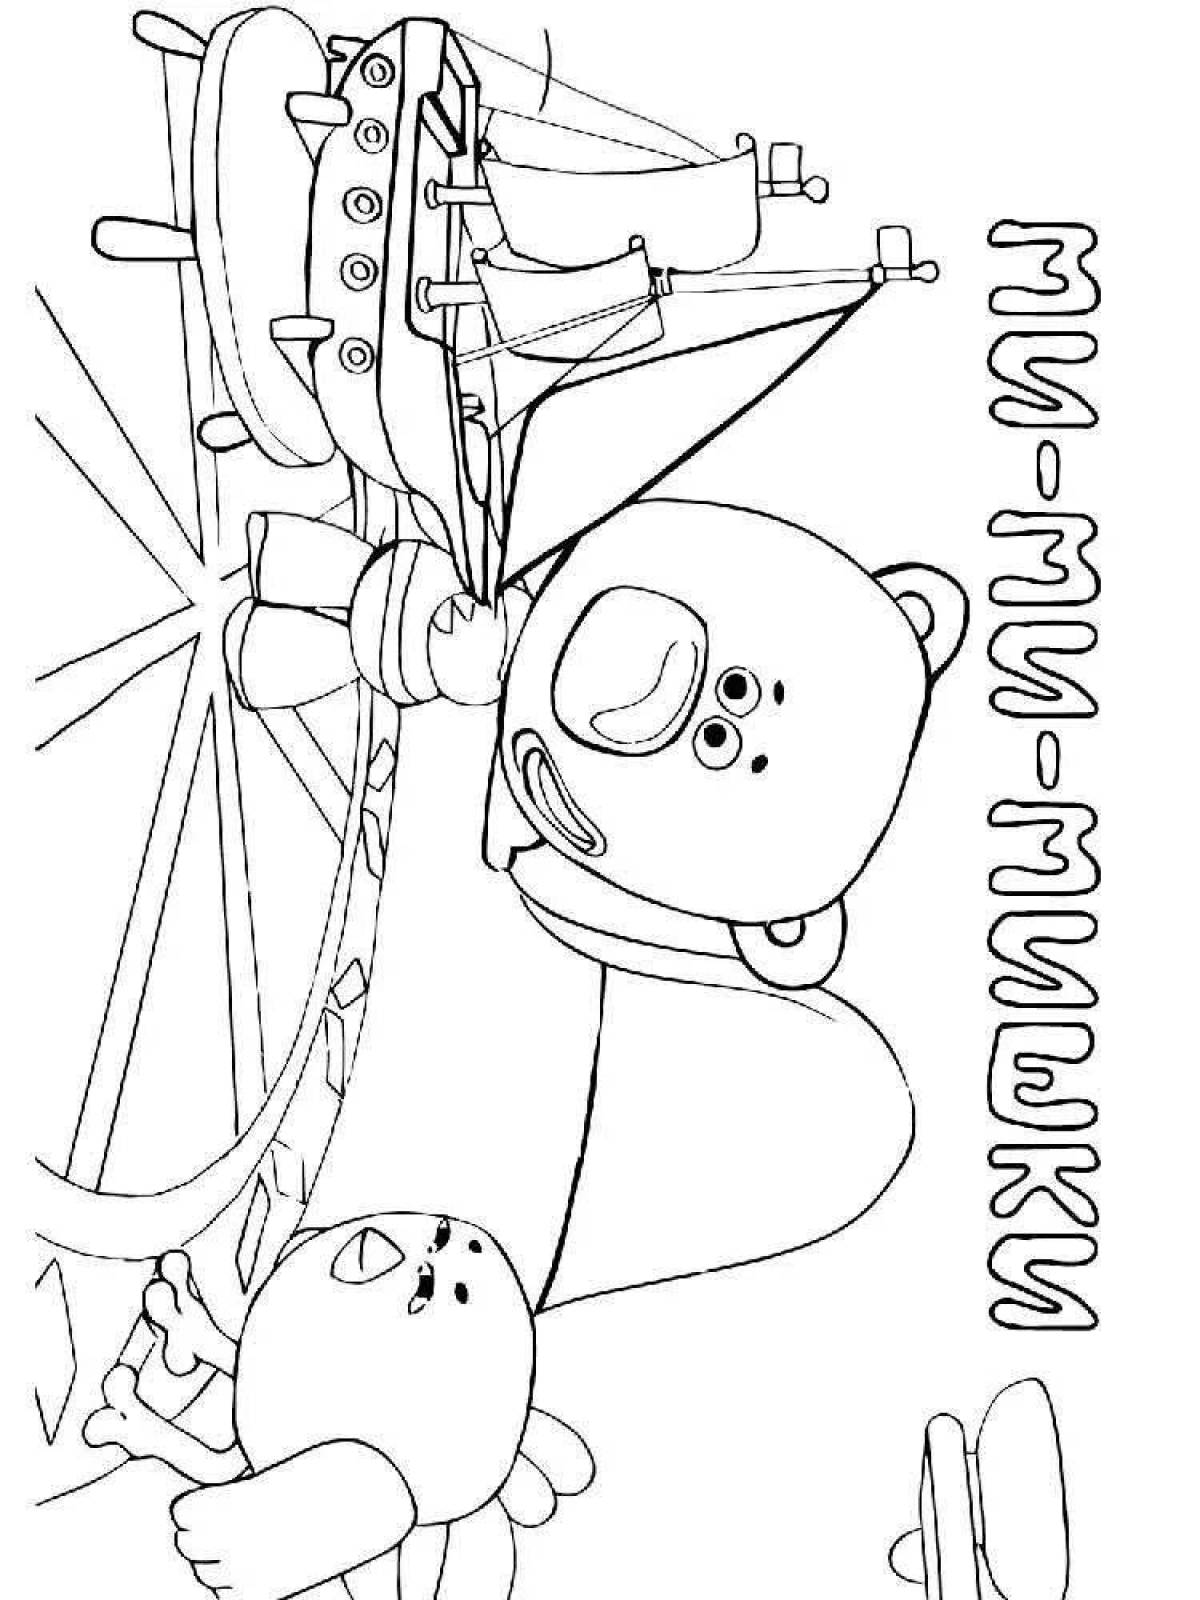 Coloring page sublime bears on the sea